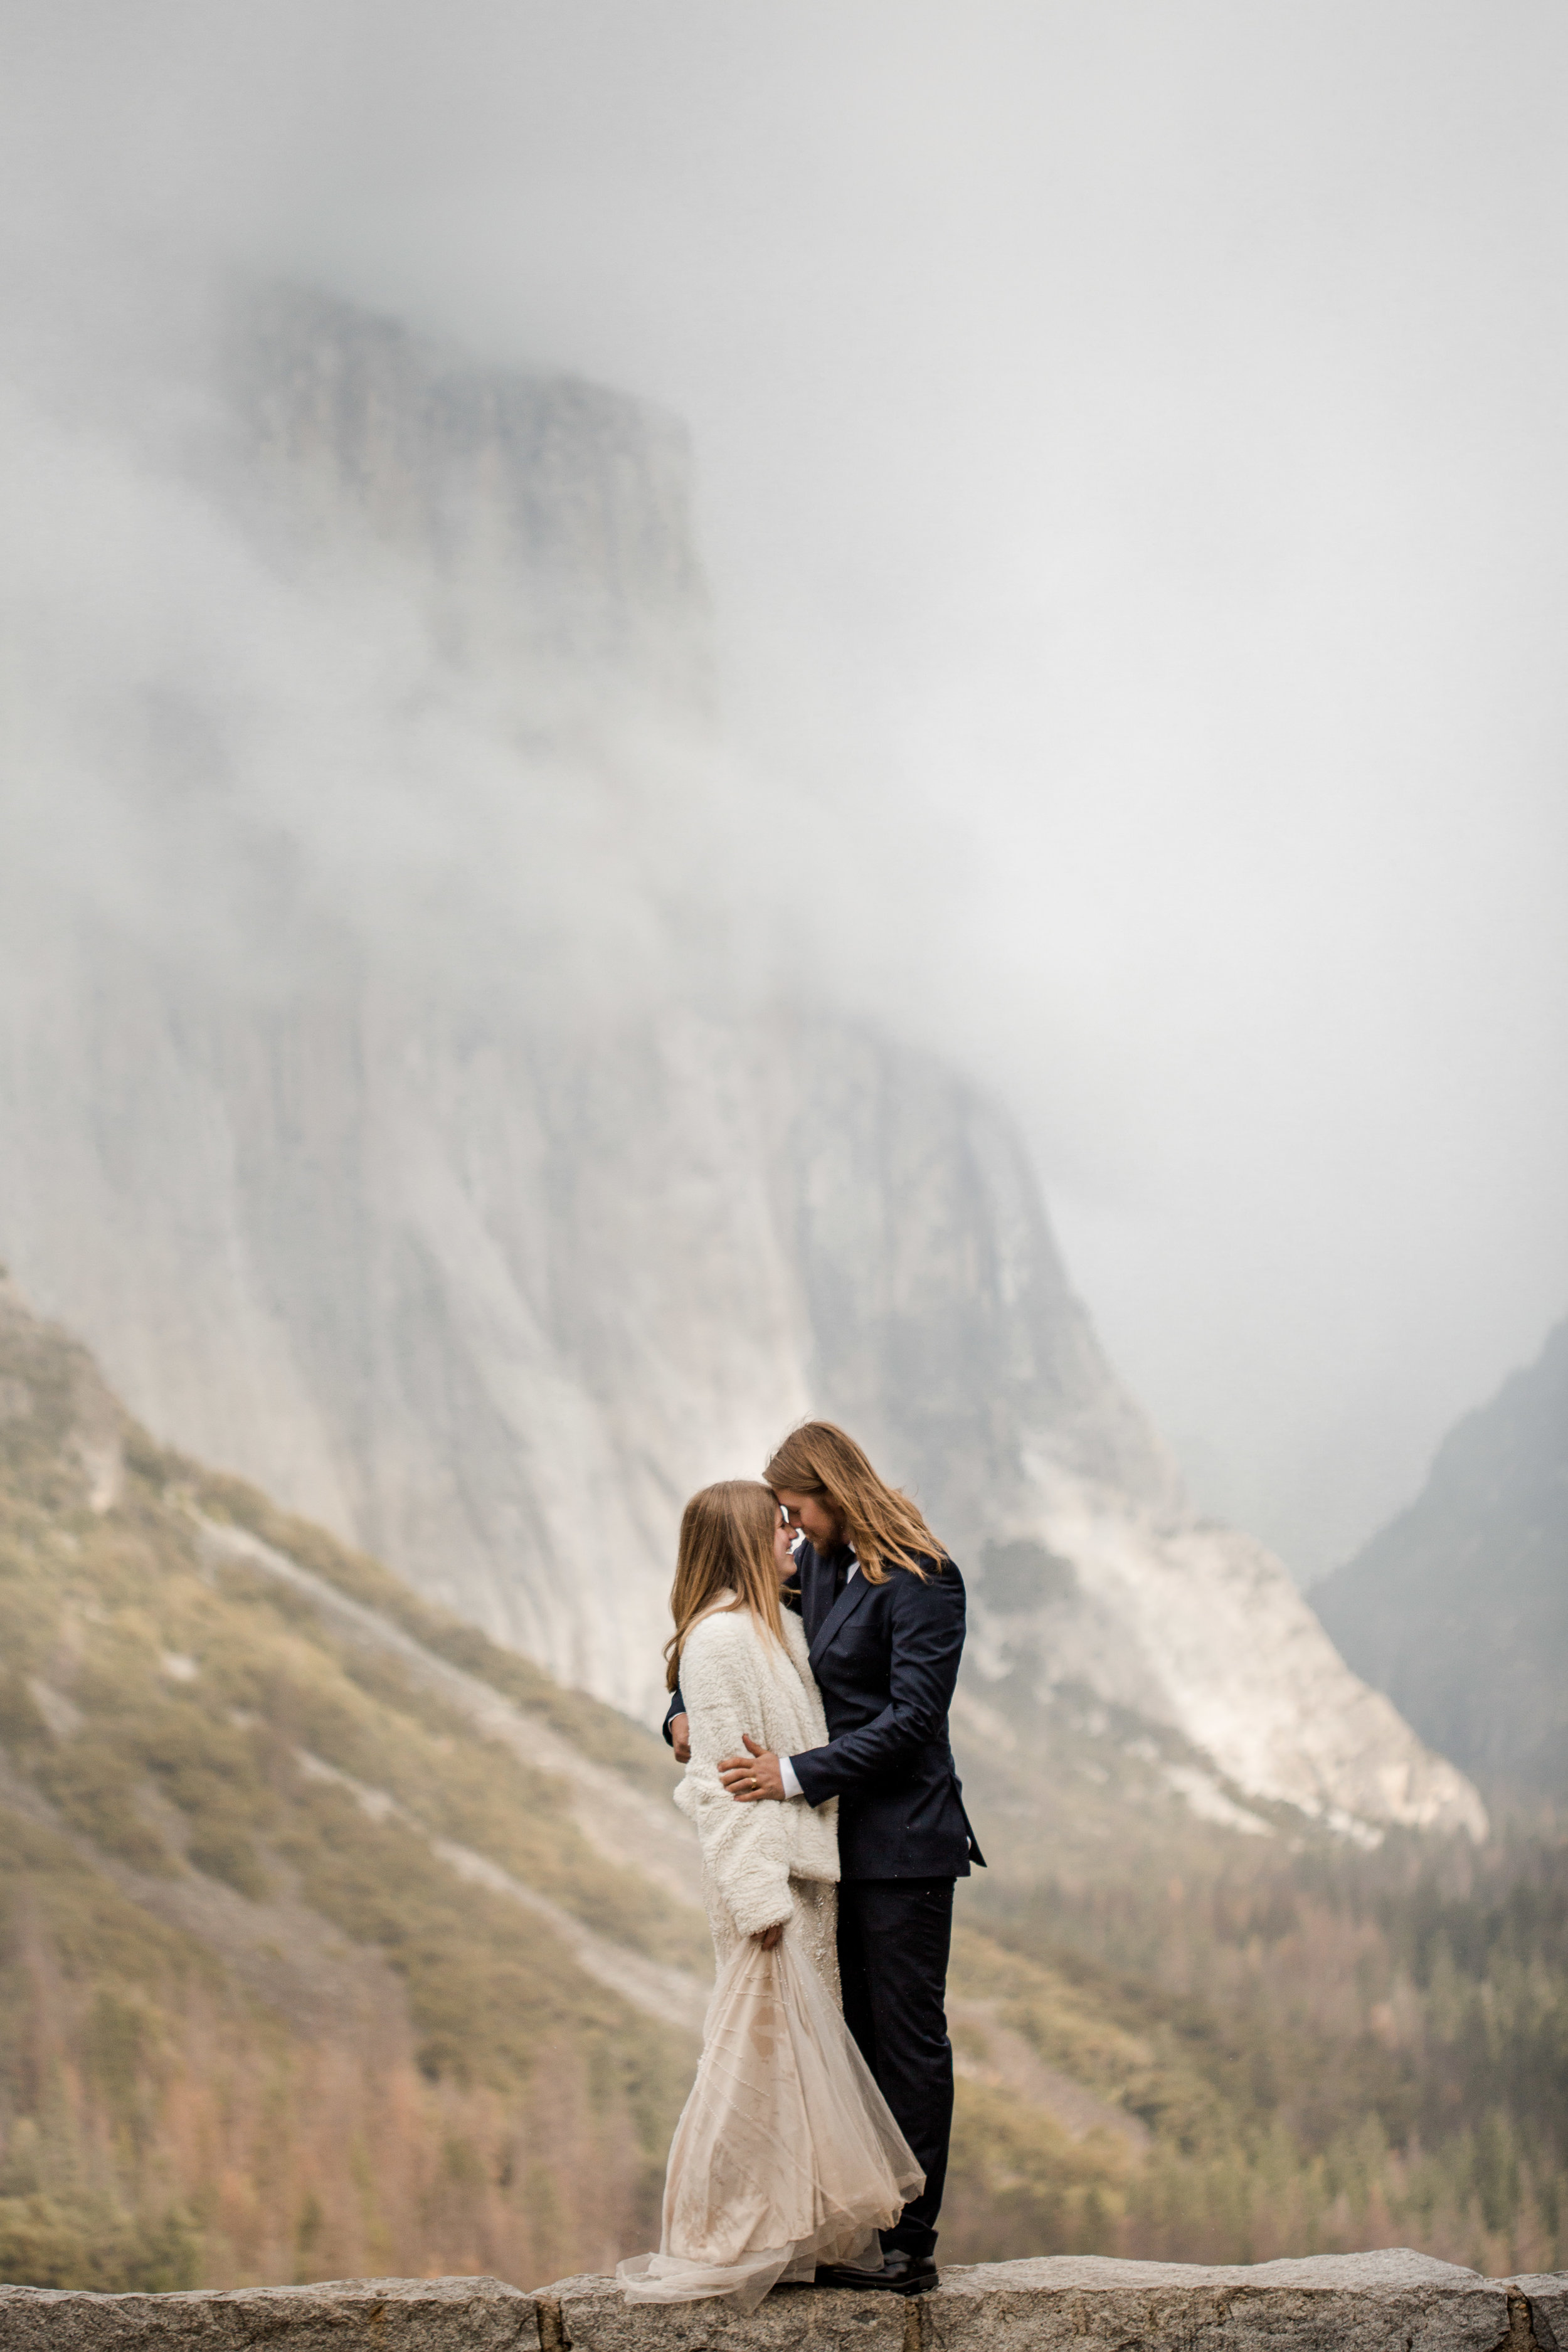 nicole-daacke-photography-yousemite-national-park-elopement-photographer-winter-cloud-moody-elope-inspiration-yosemite-valley-tunnel-view-winter-cloud-fog-weather-wedding-photos-6.jpg